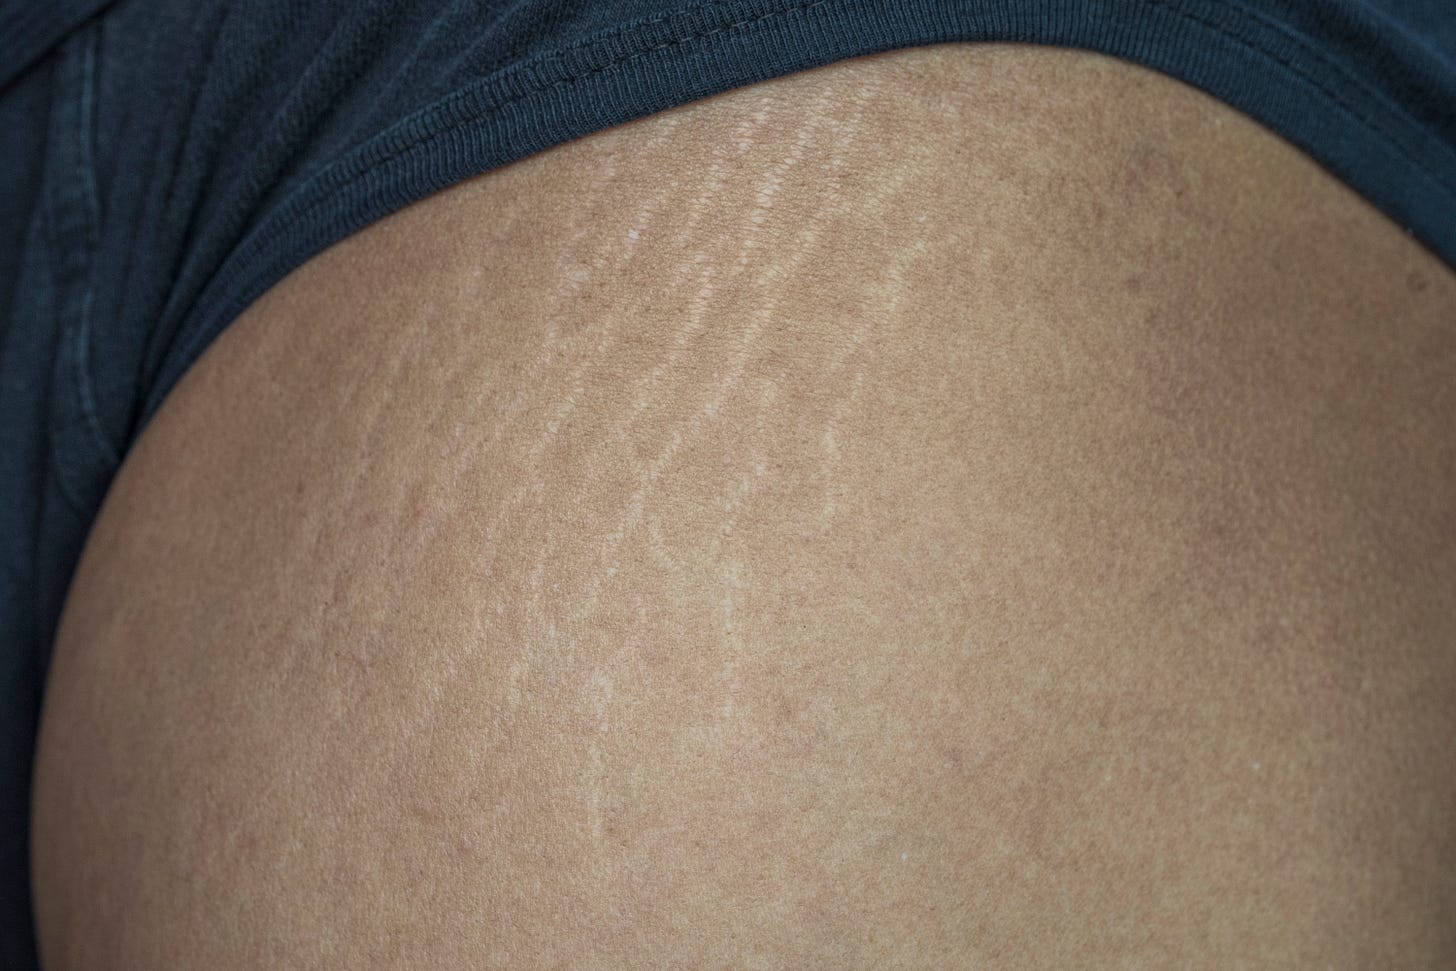 Upper leg and gluteus with stretch marks